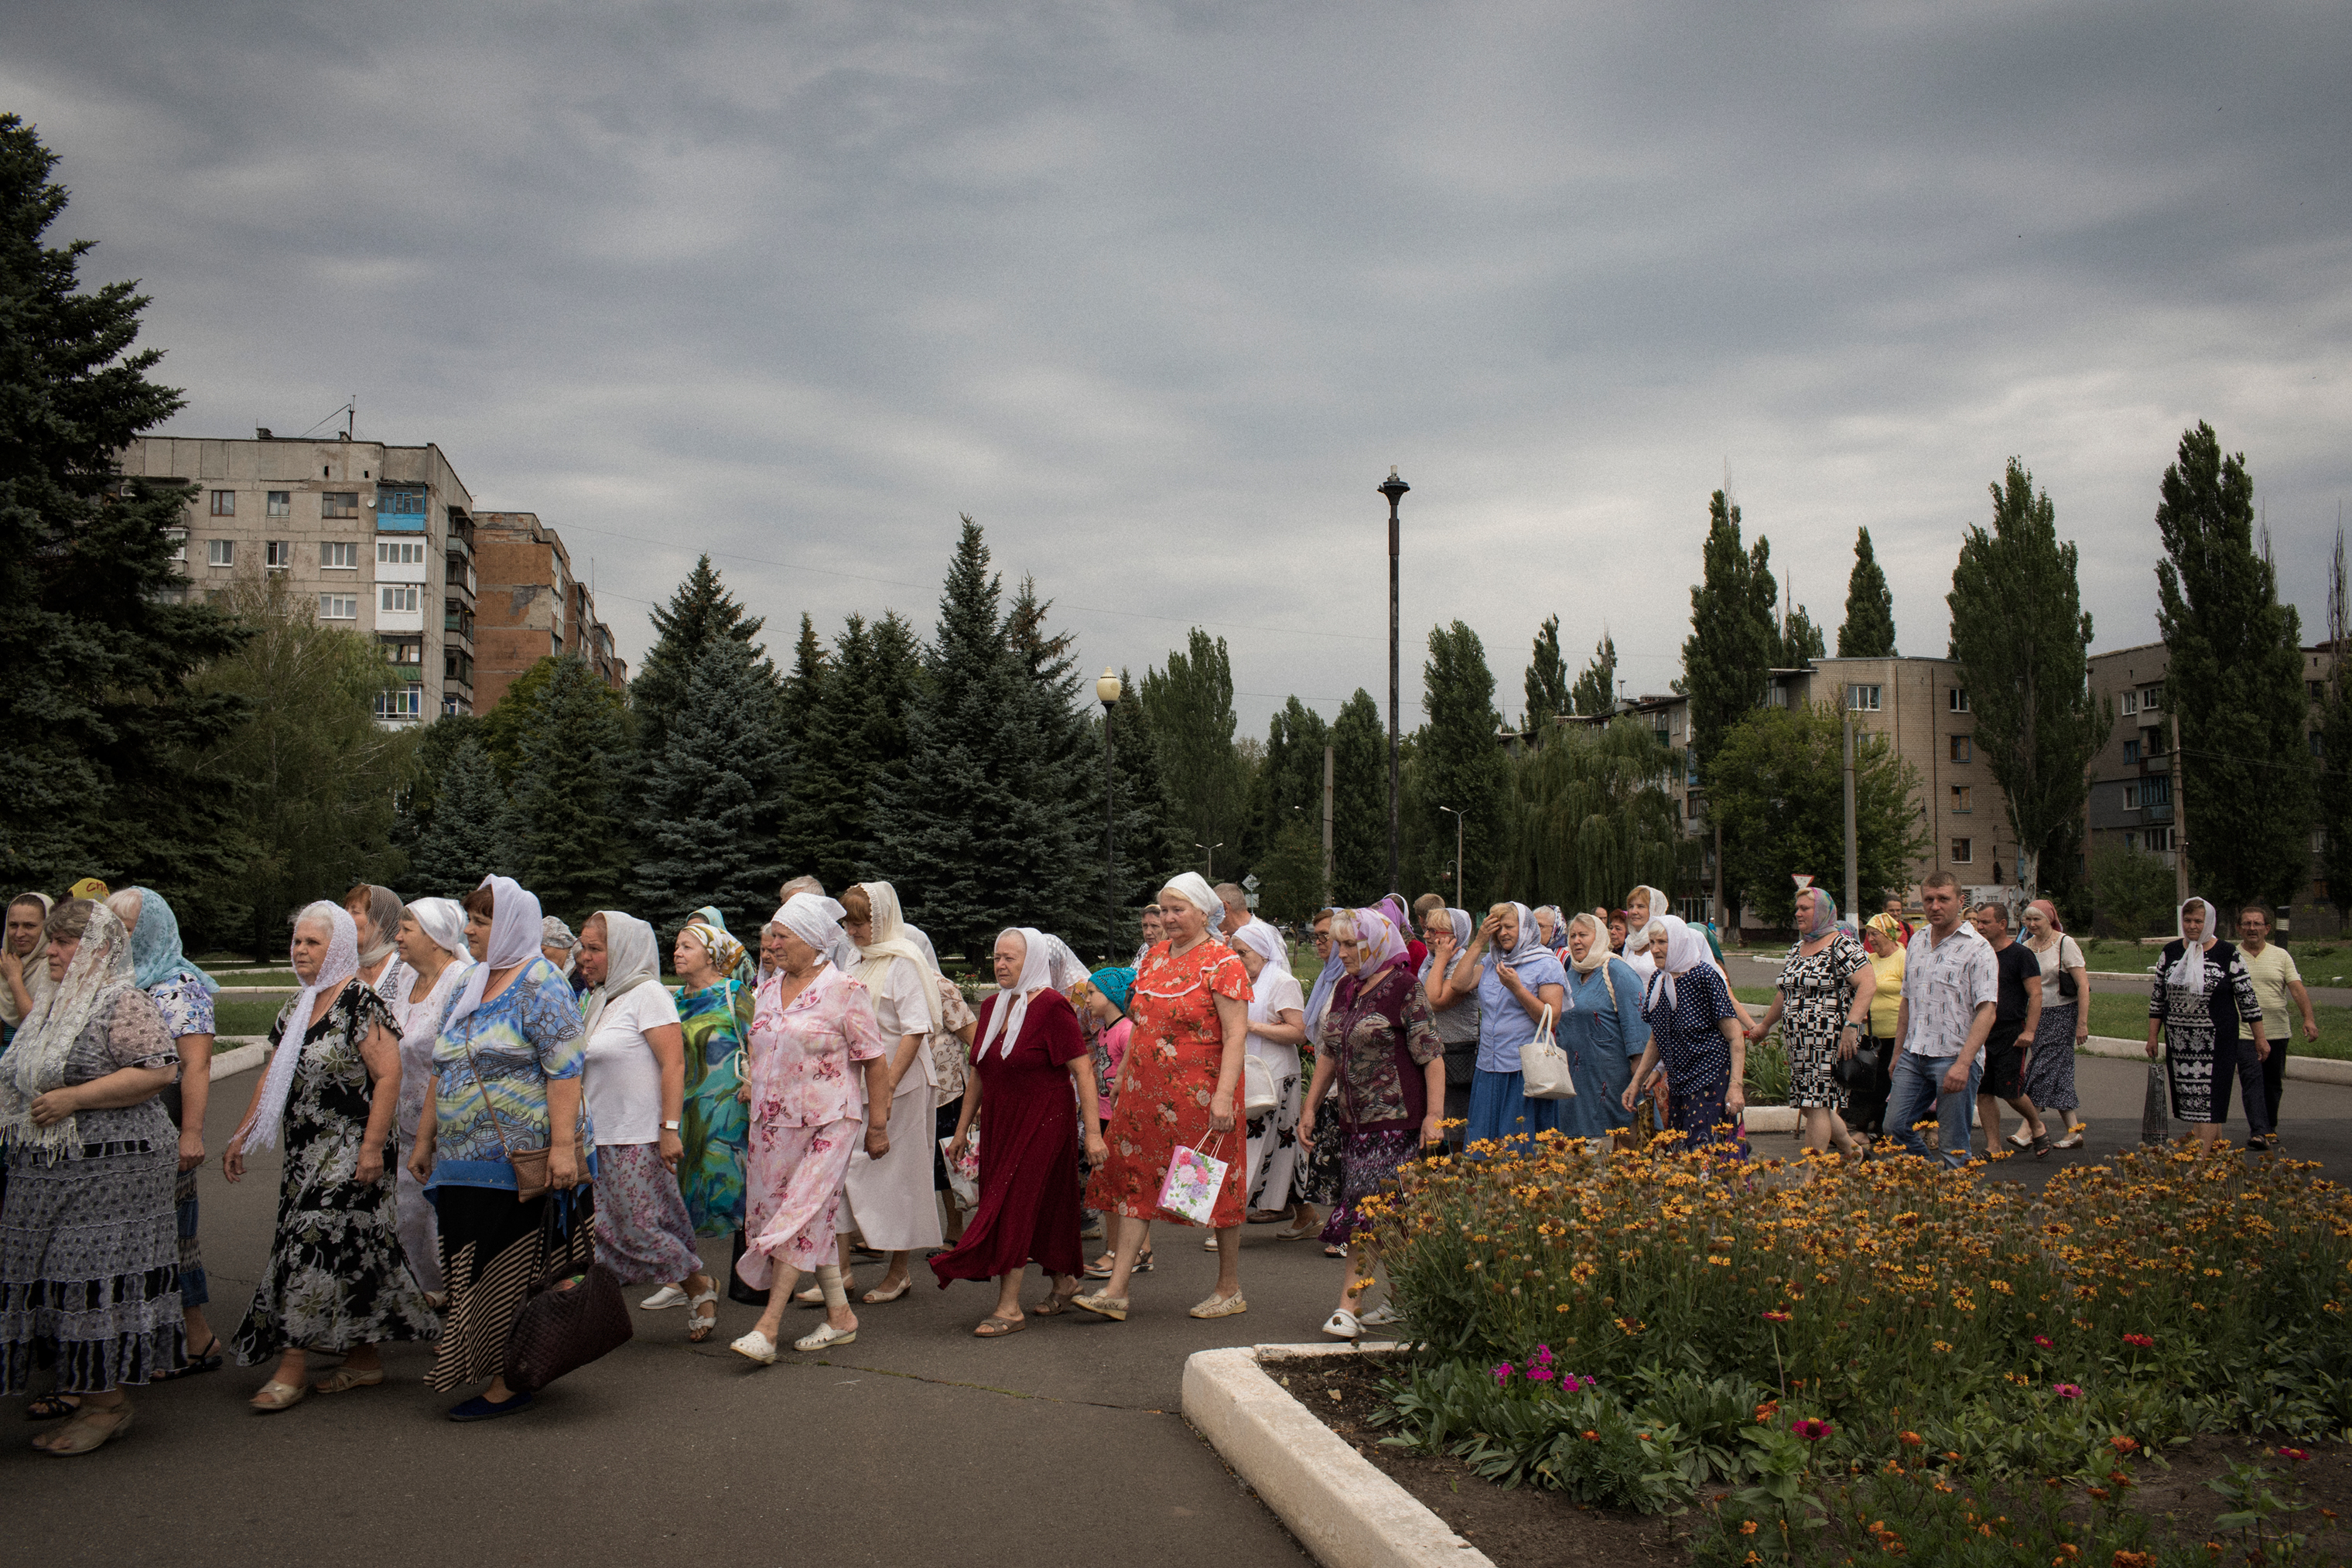 Parishioners participate in a procession in front of the Church of St. Mary Magdalene in Avdeevka. The church stands next to a minefield. (Anastasia Taylor-Lind for eyeWitness)